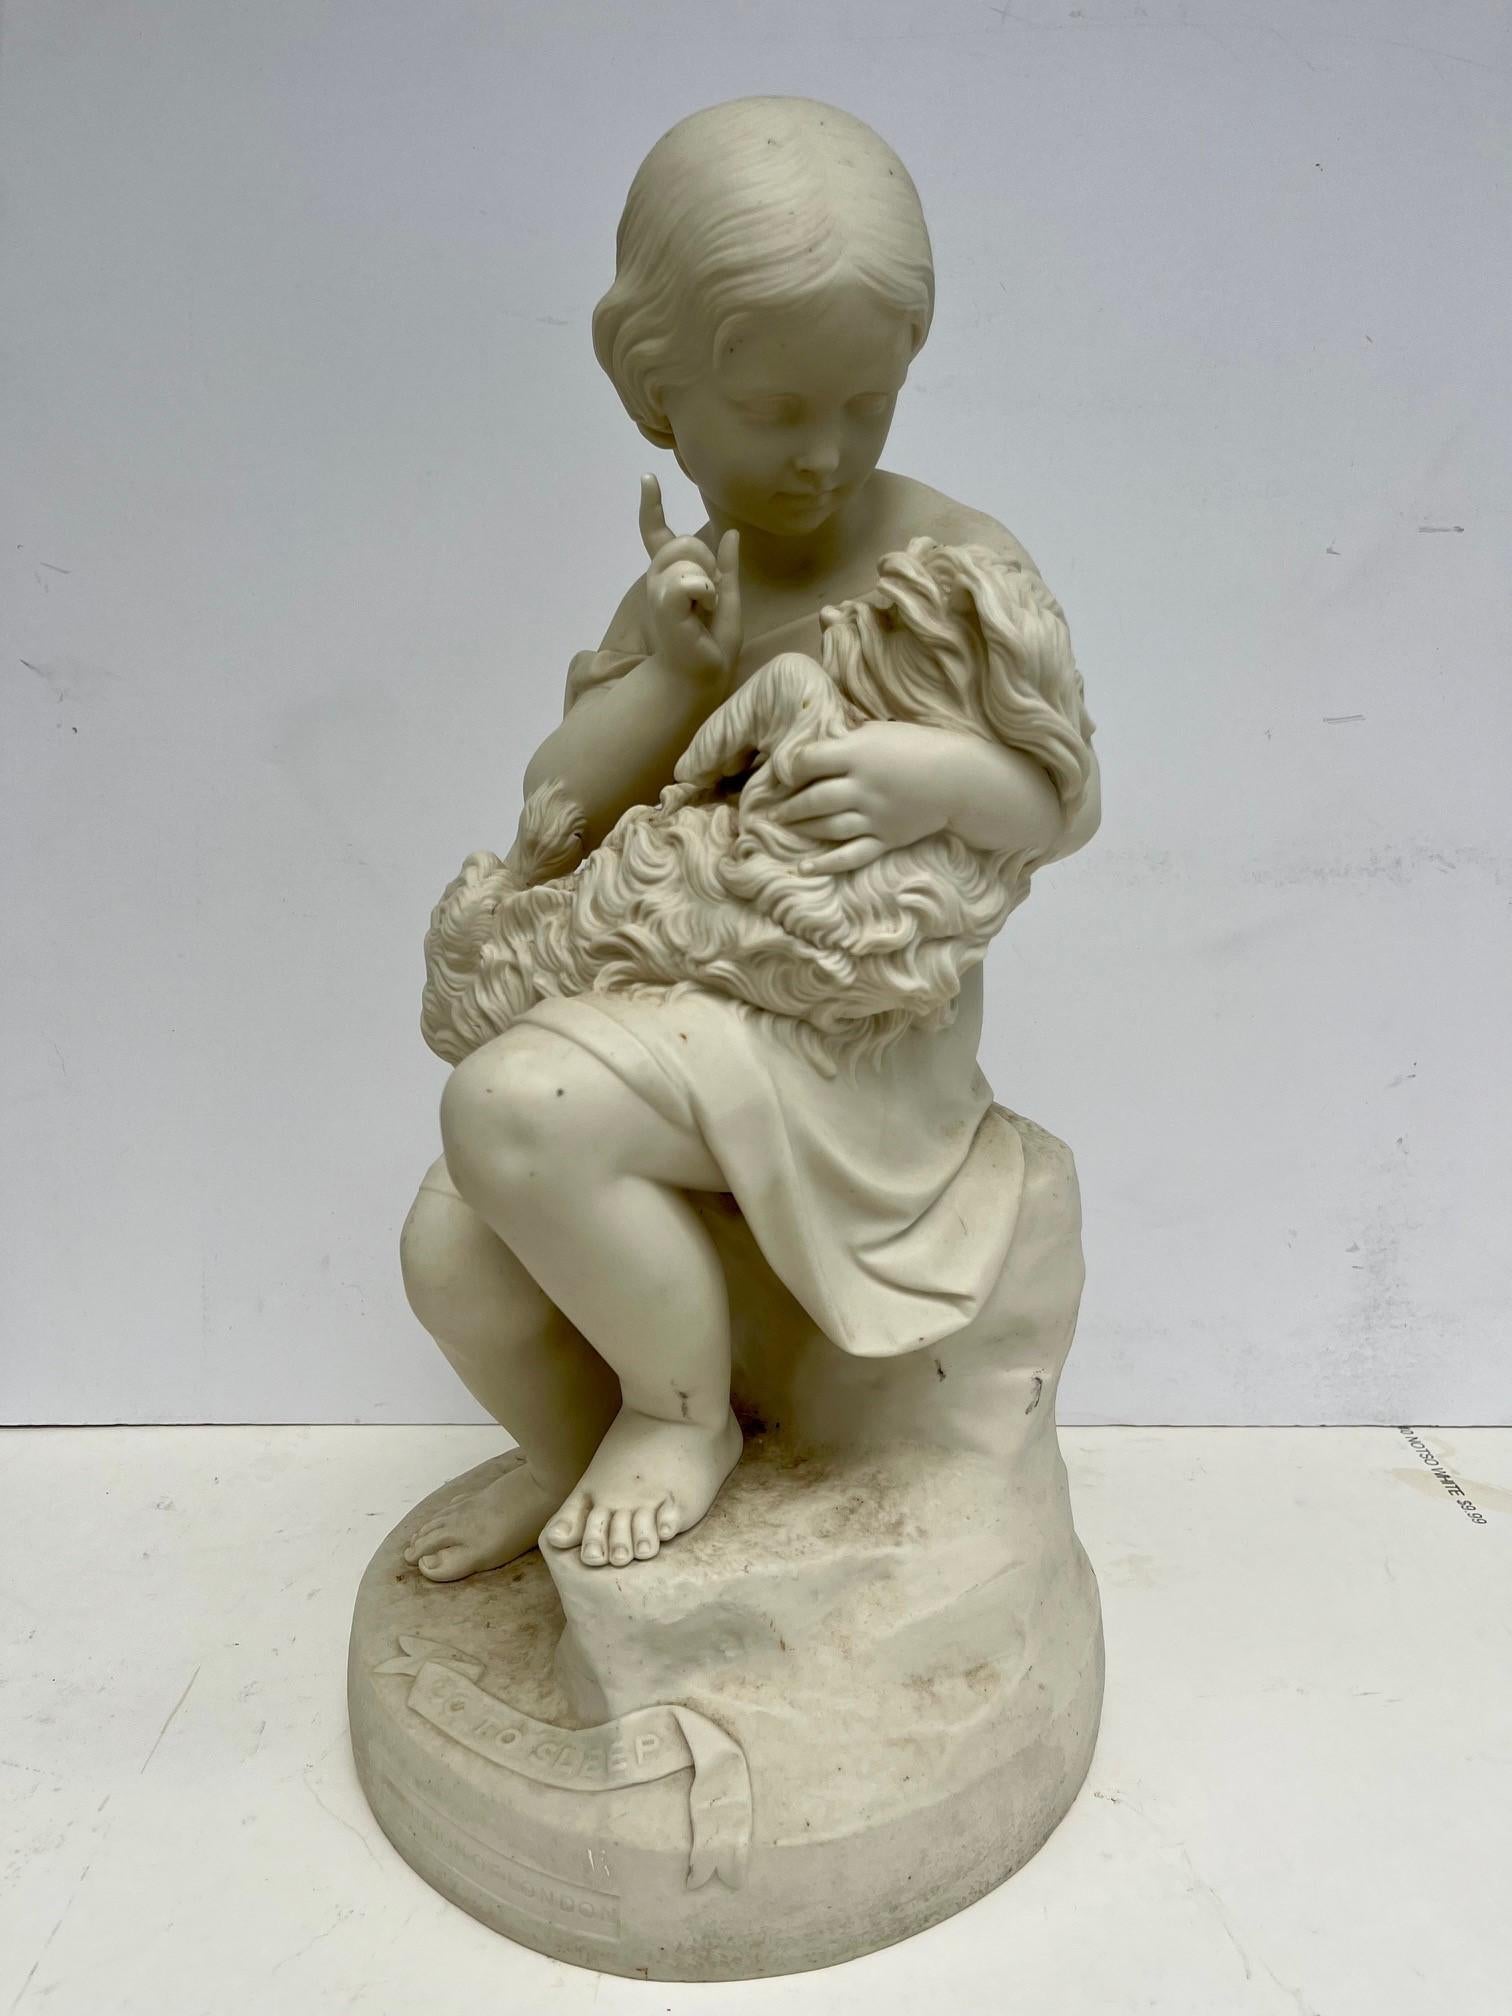 Antique English Bisque Sculpture Signed J. Durham 1814-1877.

Copland bisque sculpture titled, “Go to Sleep“ was made for the Art Union of London. It depicts a charming scene of a young girl with her dog. The figure was sculpted after the original